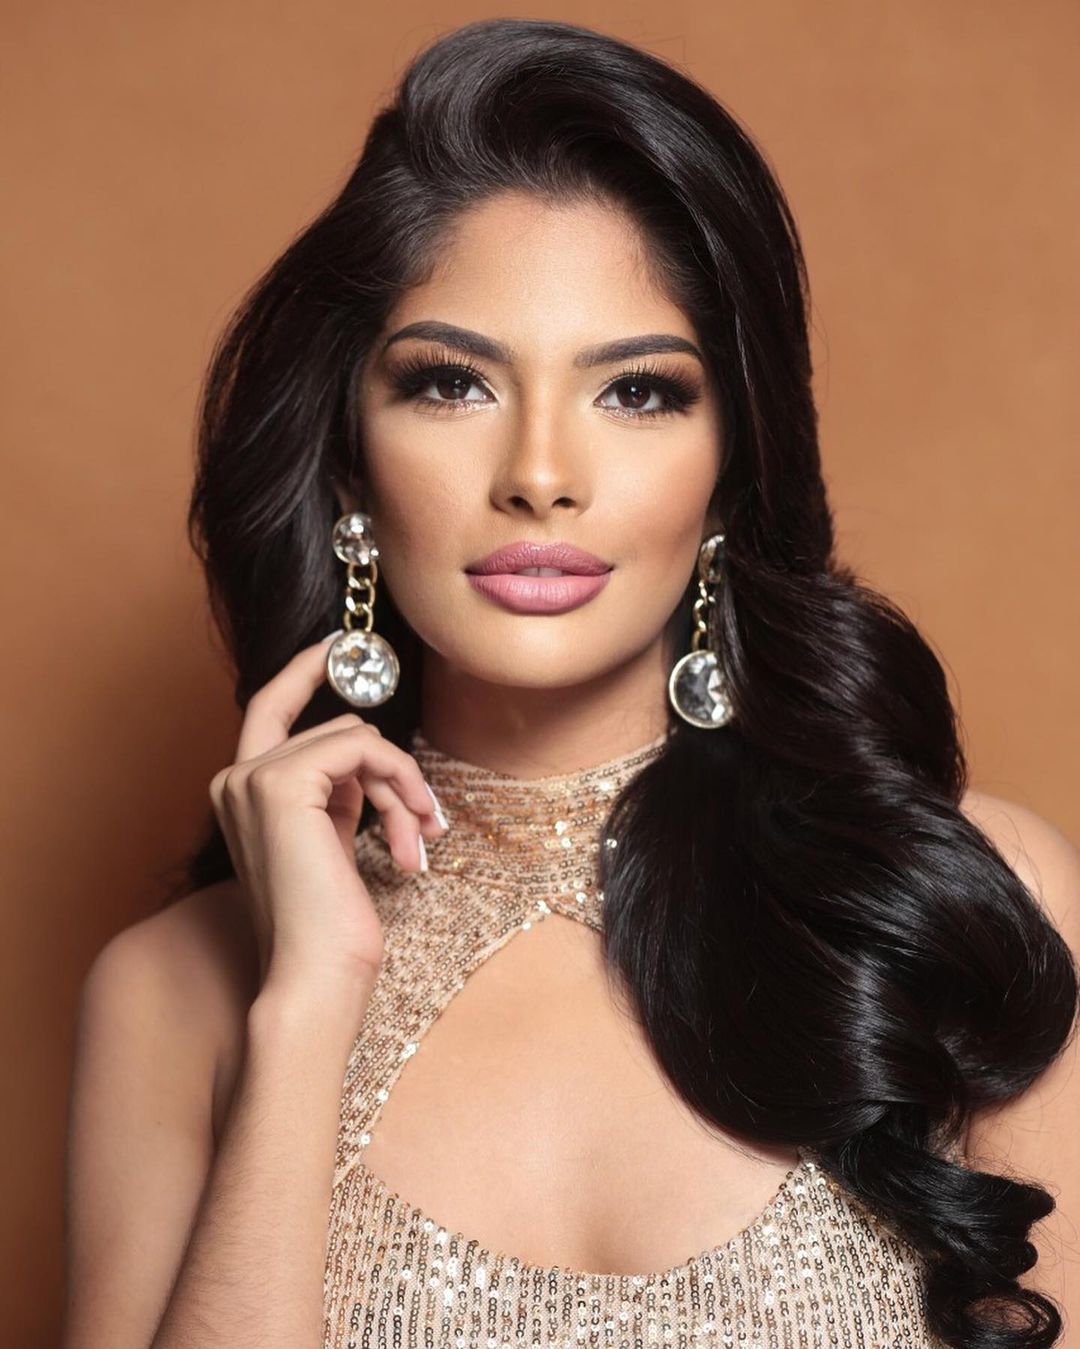 Missosology on Twitter: "𝗘𝗡𝗖𝗛𝗔𝗡𝗧𝗜𝗡𝗚 𝗕𝗘𝗔𝗨𝗧𝗬 | Miss World  Nicaragua 2020 Sheynnis Palacios. Are we looking at the next Miss World?  #MissWorld #MissWorldNicaragua2020 #MissWorldNicaragua #MissosologyBig5  #PageantsThatMatter ...